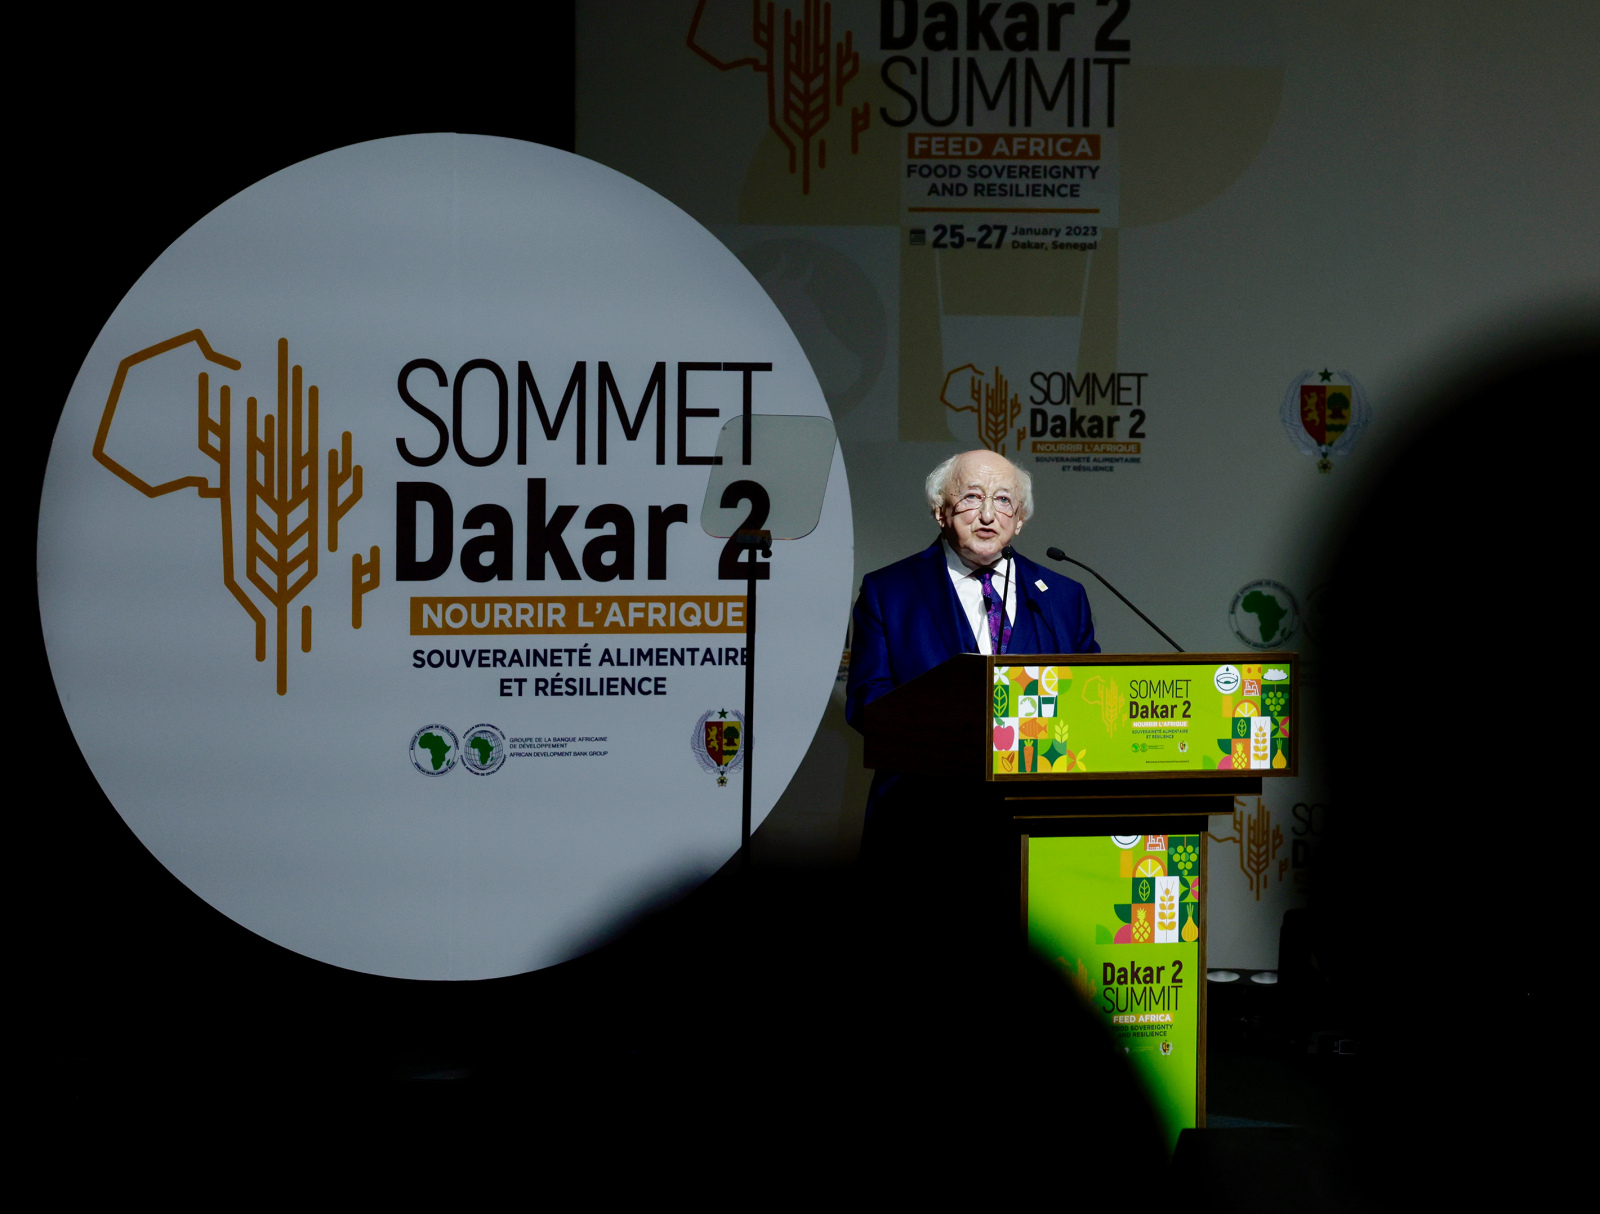 Opening address at the Africa Food Summit